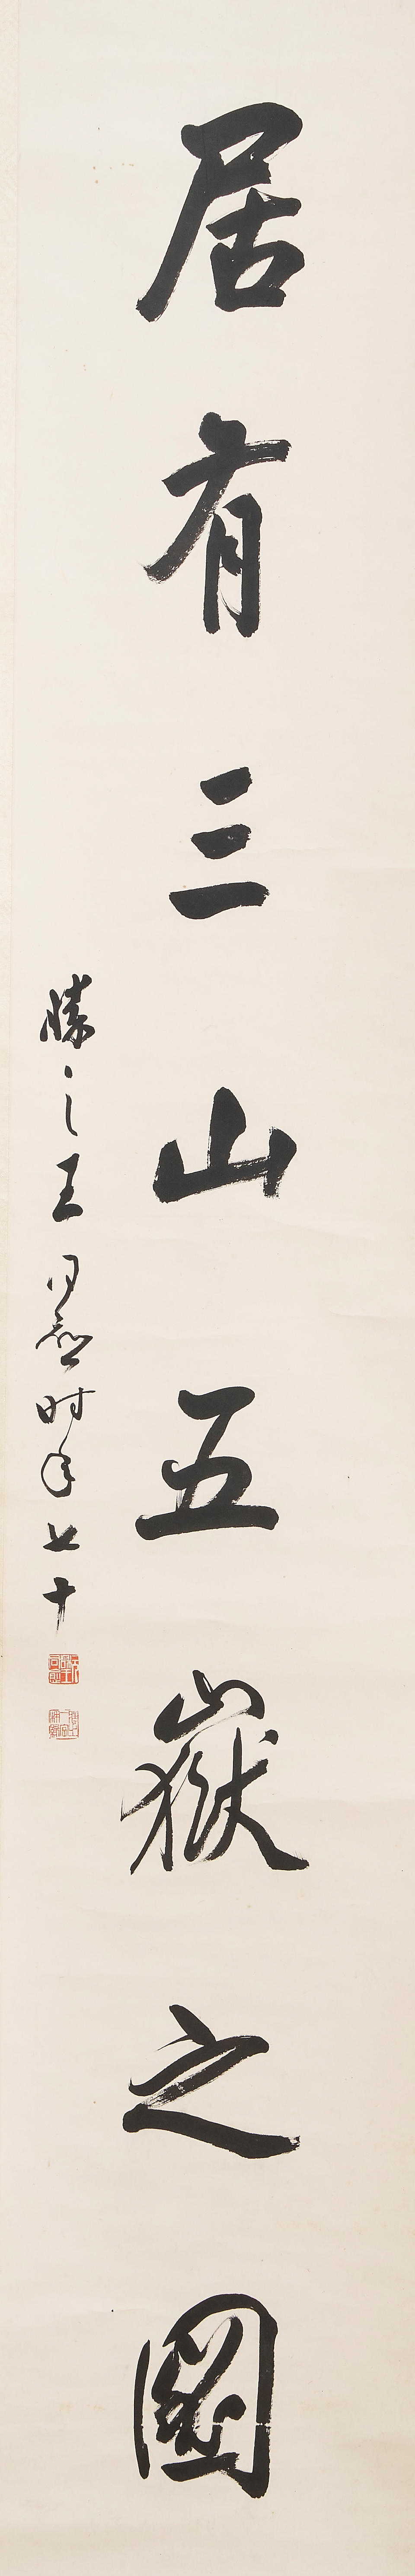 Wang Tongyu (1855-1941) Calligraphy Couplet in Running Style (2) - Image 3 of 3